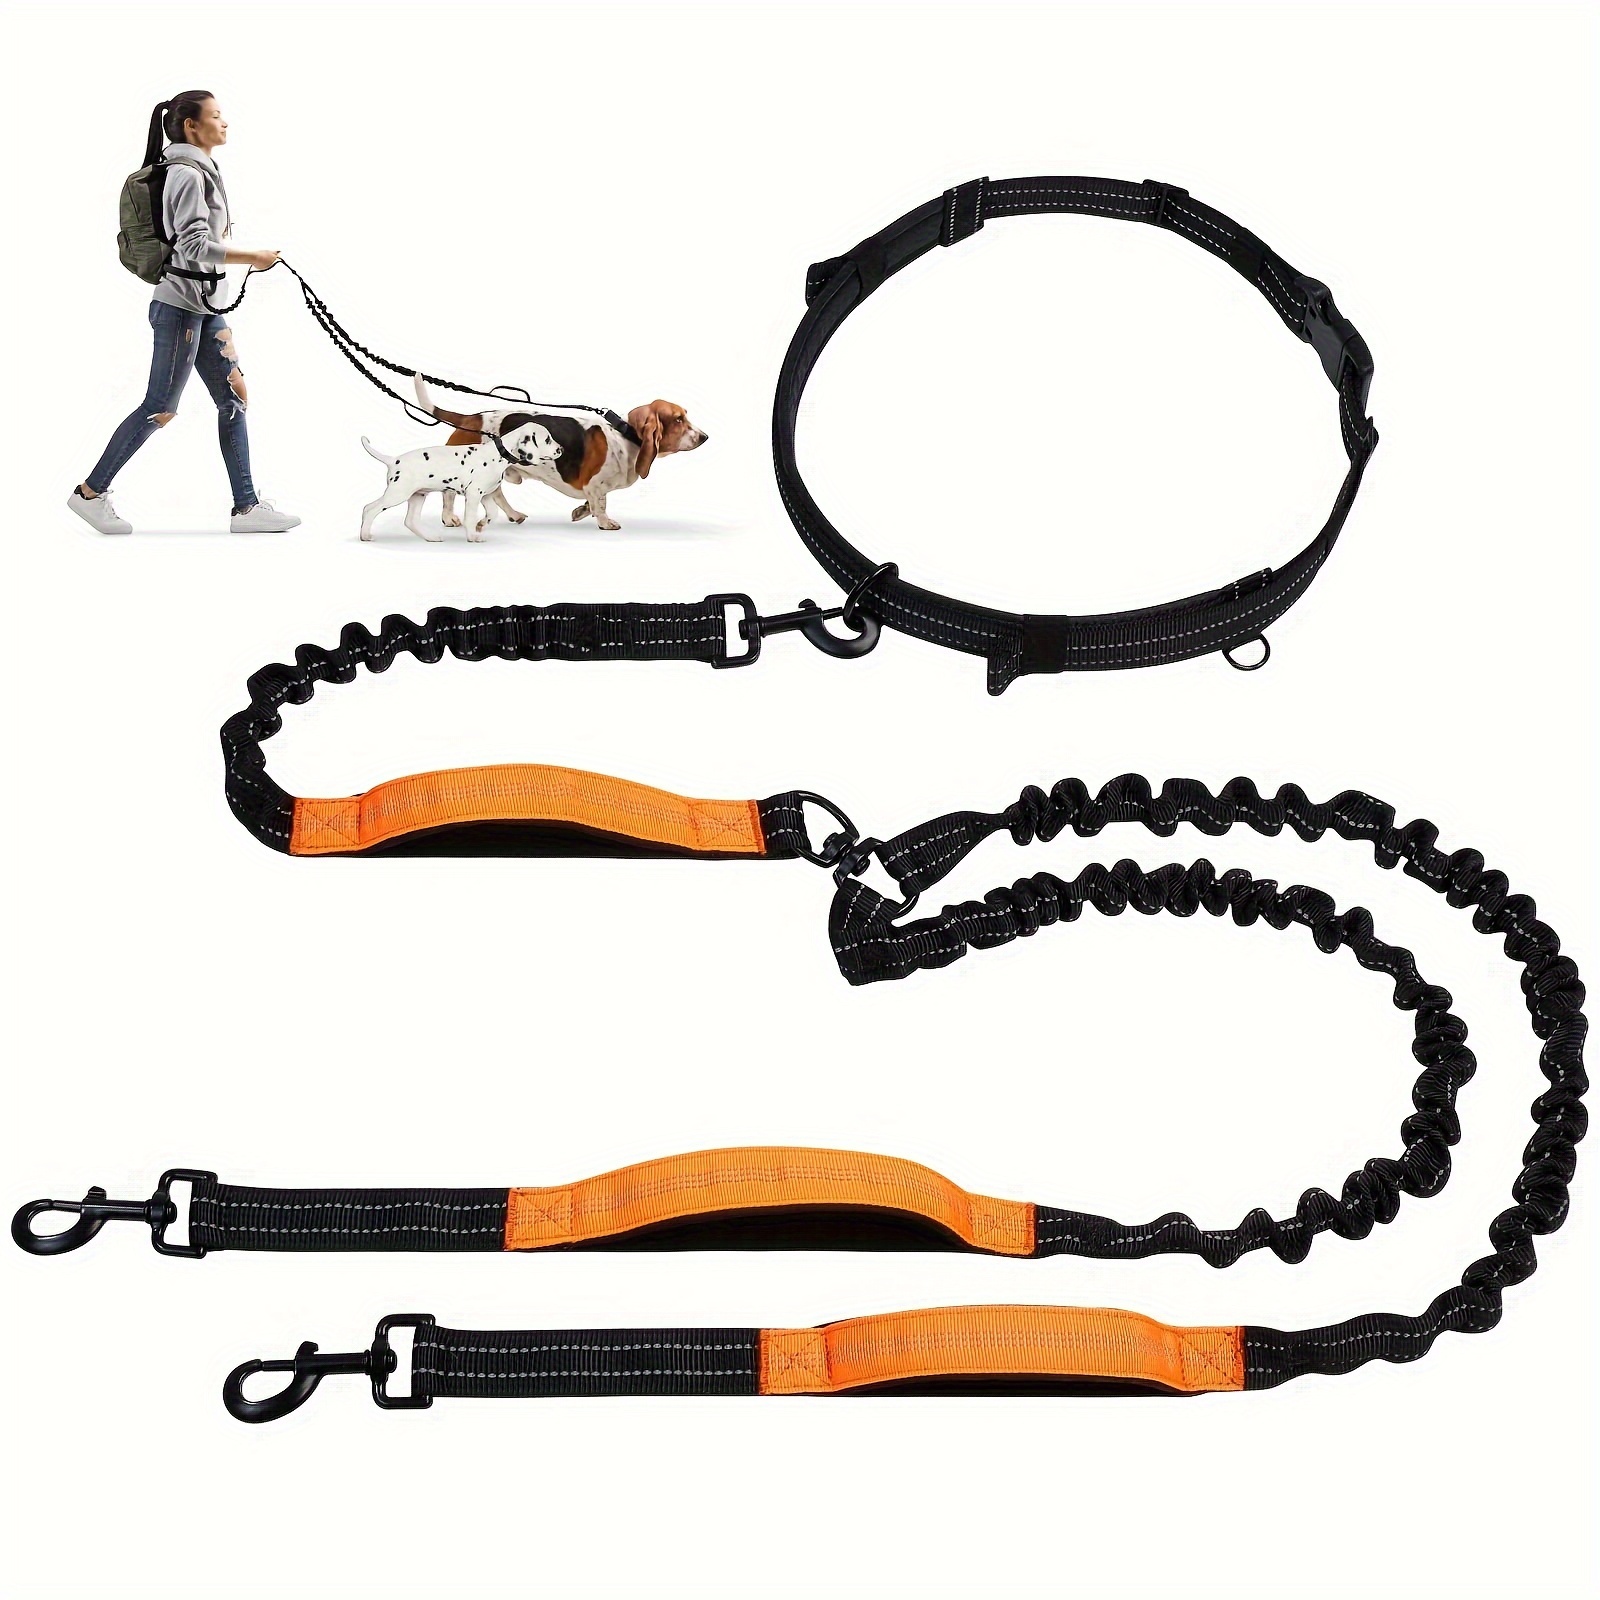 

Hands Free Dog Leash For 2 Dogs, Reflective Running Dog Leash With Padded Handle And Strong Bungees, Adjustable Waist Belt For Walking Jogging Hiking